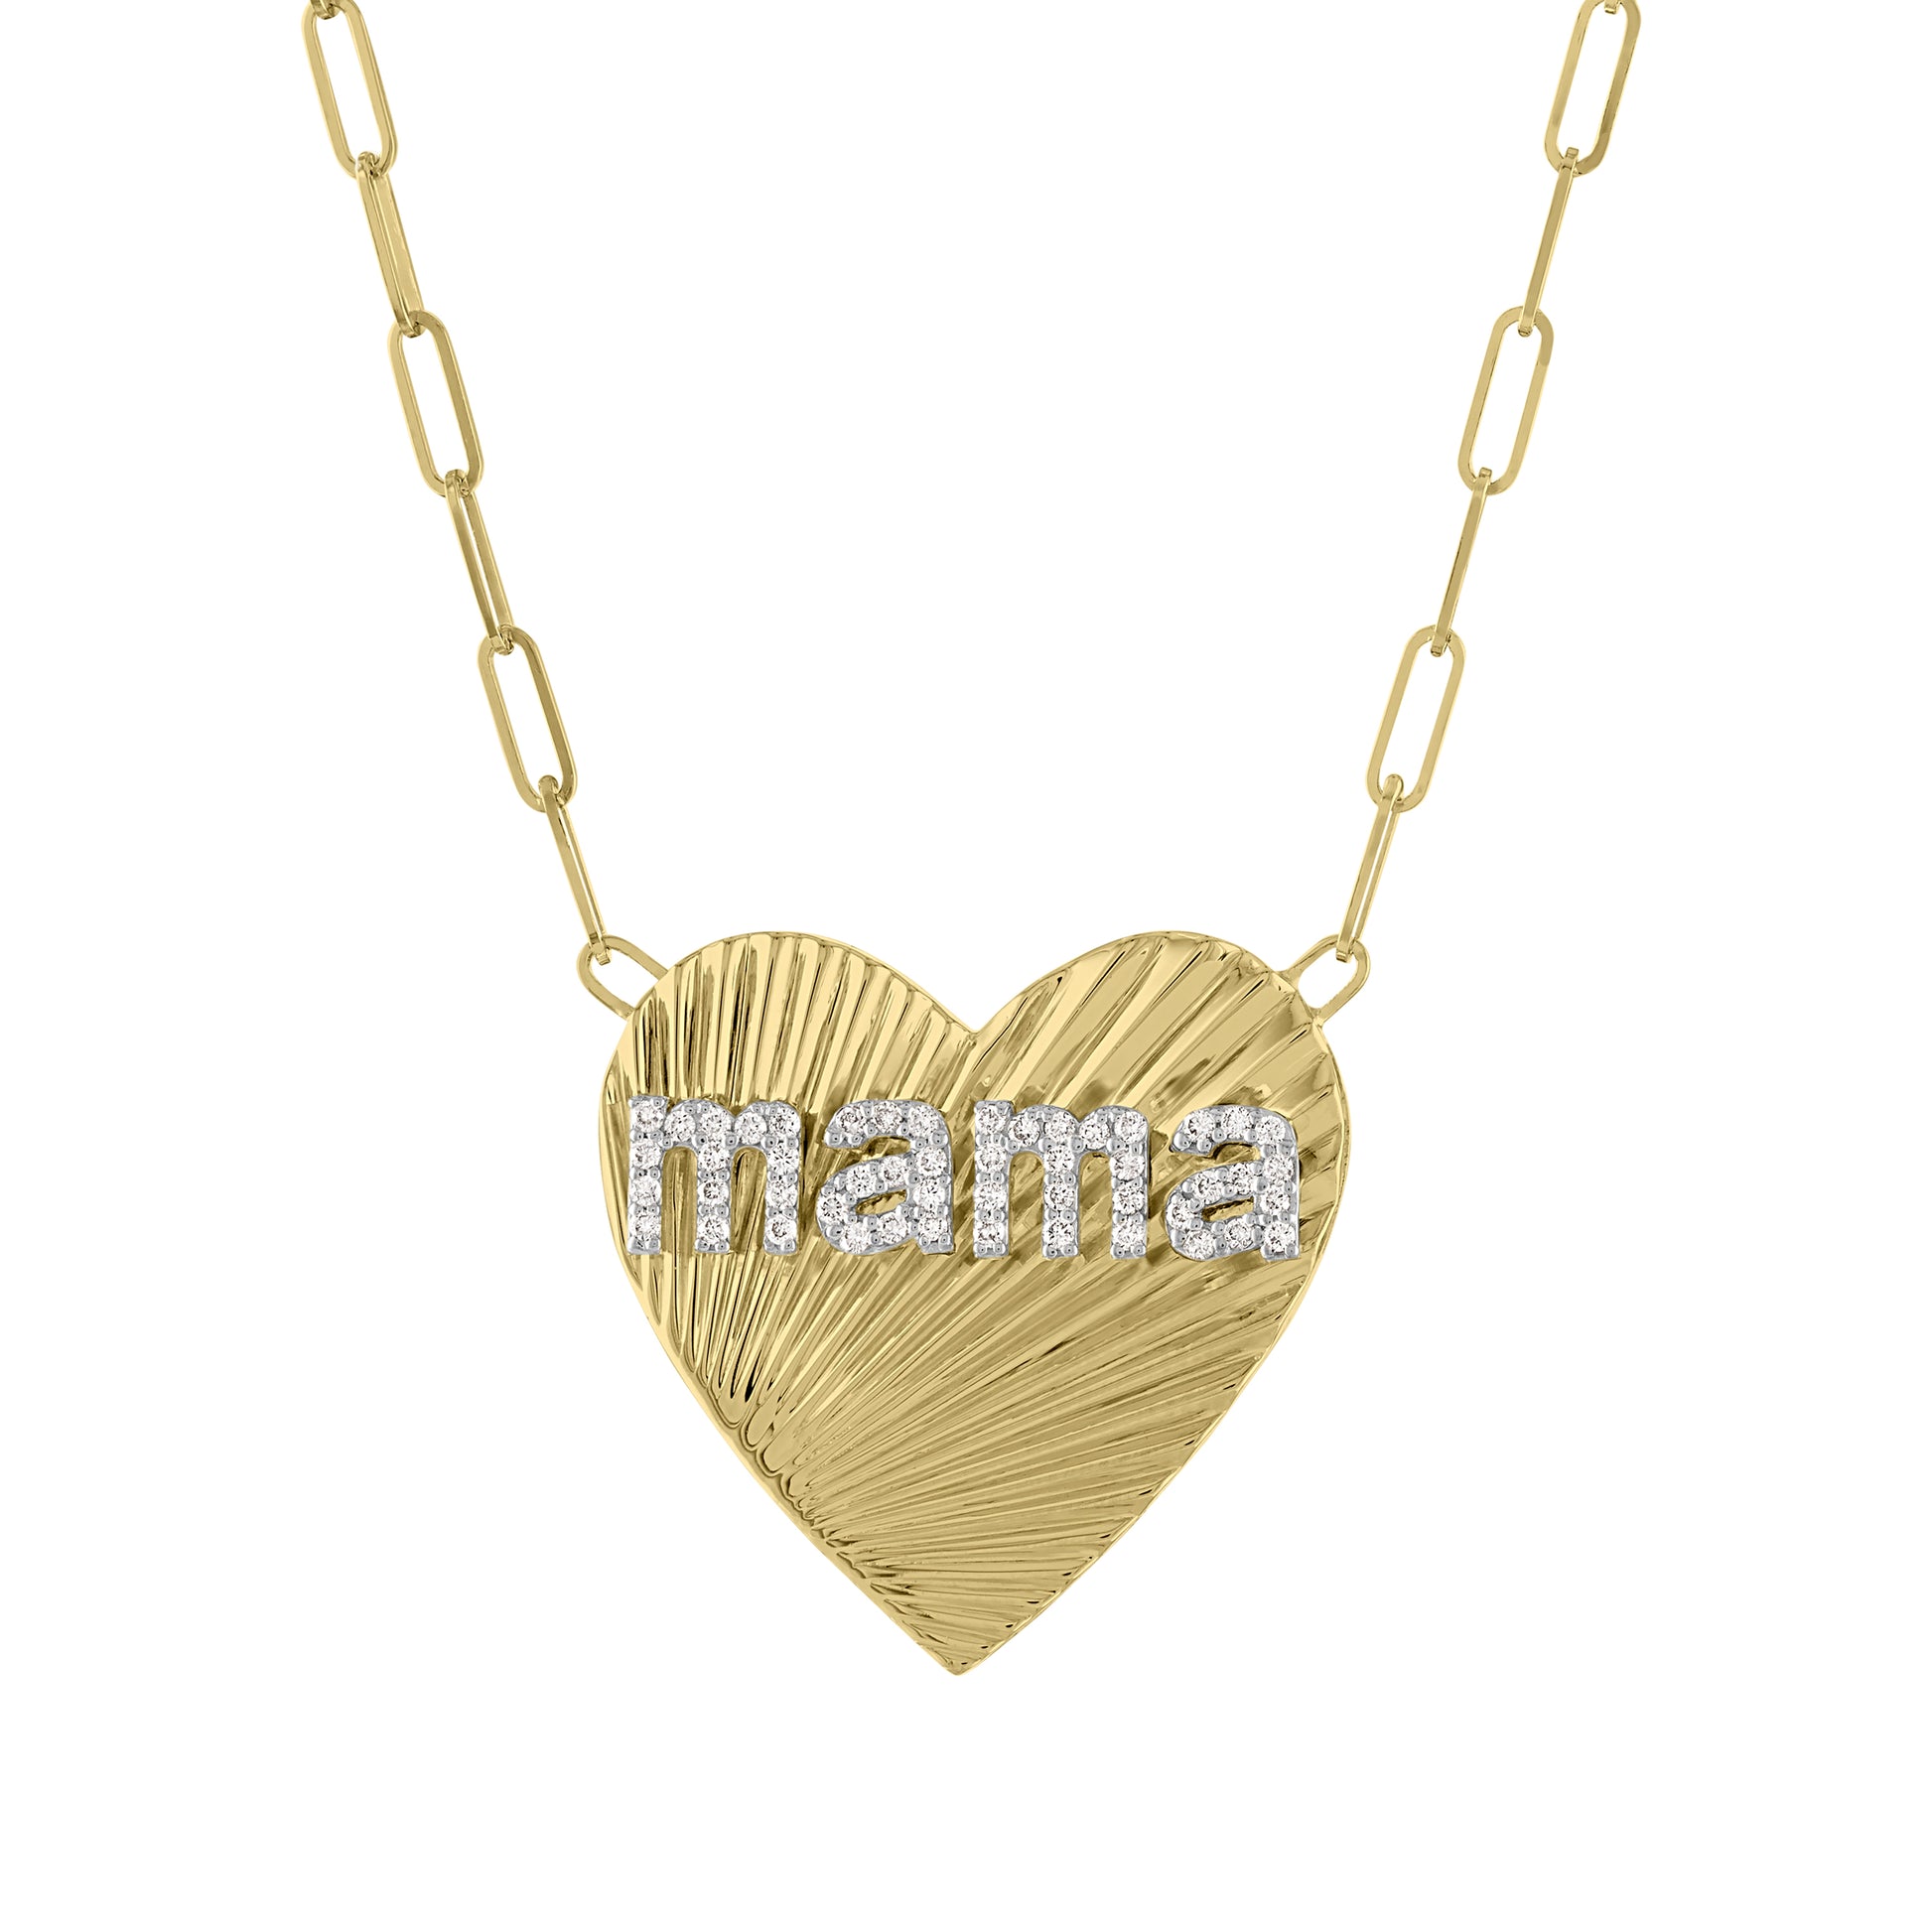 Yellow gold heart necklace with fluting and diamond mama in the center. 